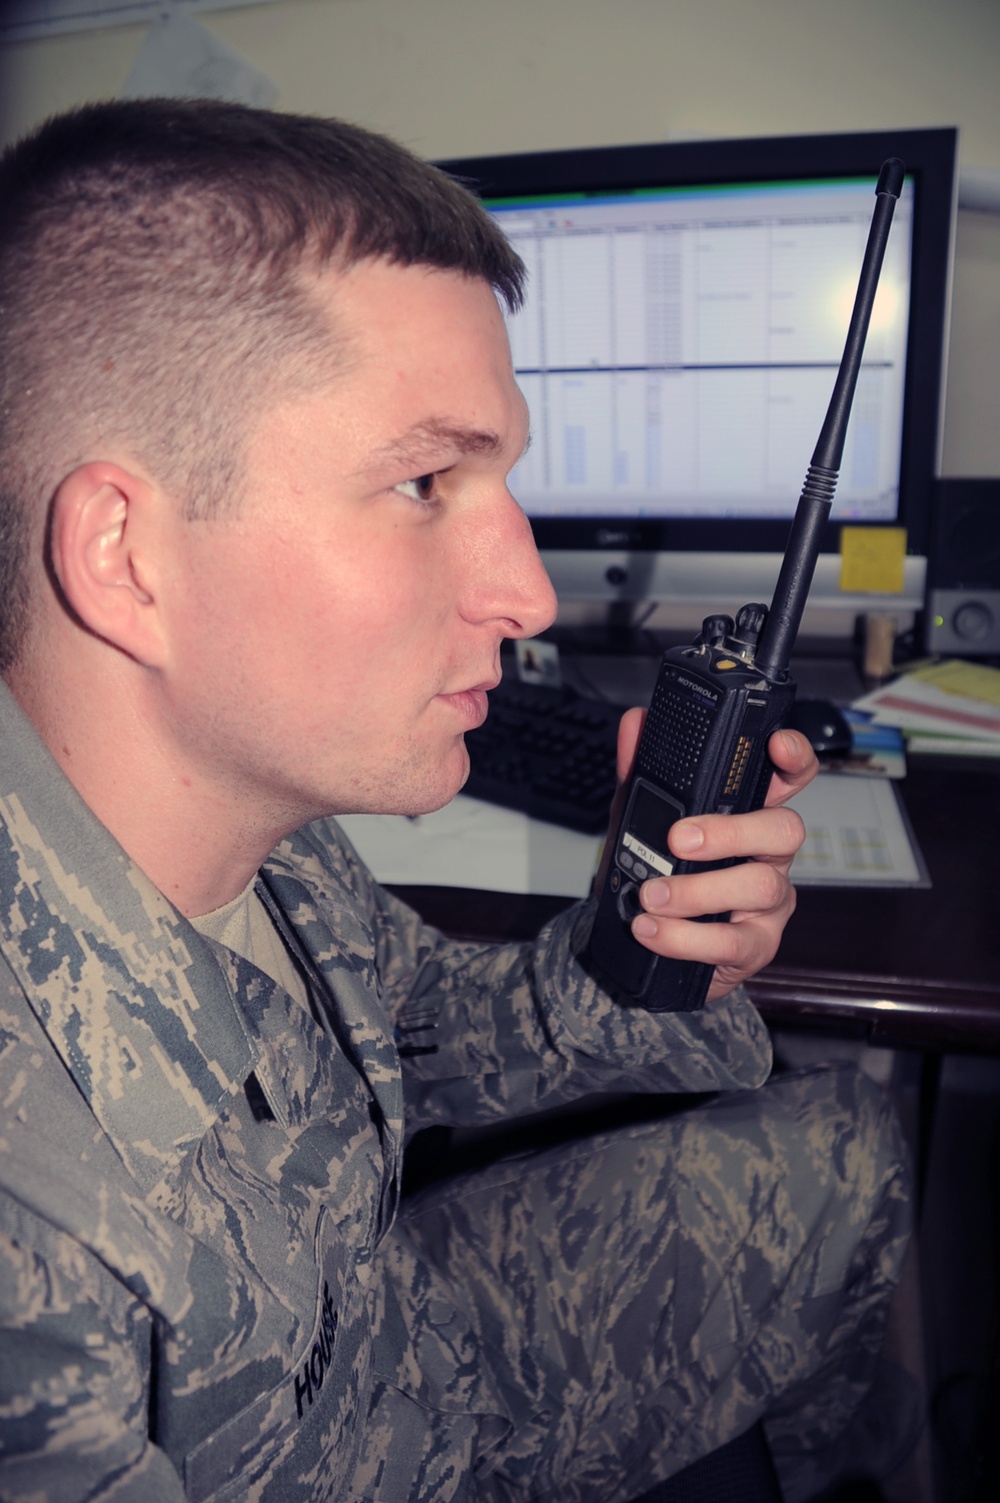 Mildenhall Staff Sergeant, Danville Native, Coordinates Fuels Operations Support for Southwest Asia AR, ISR Wing